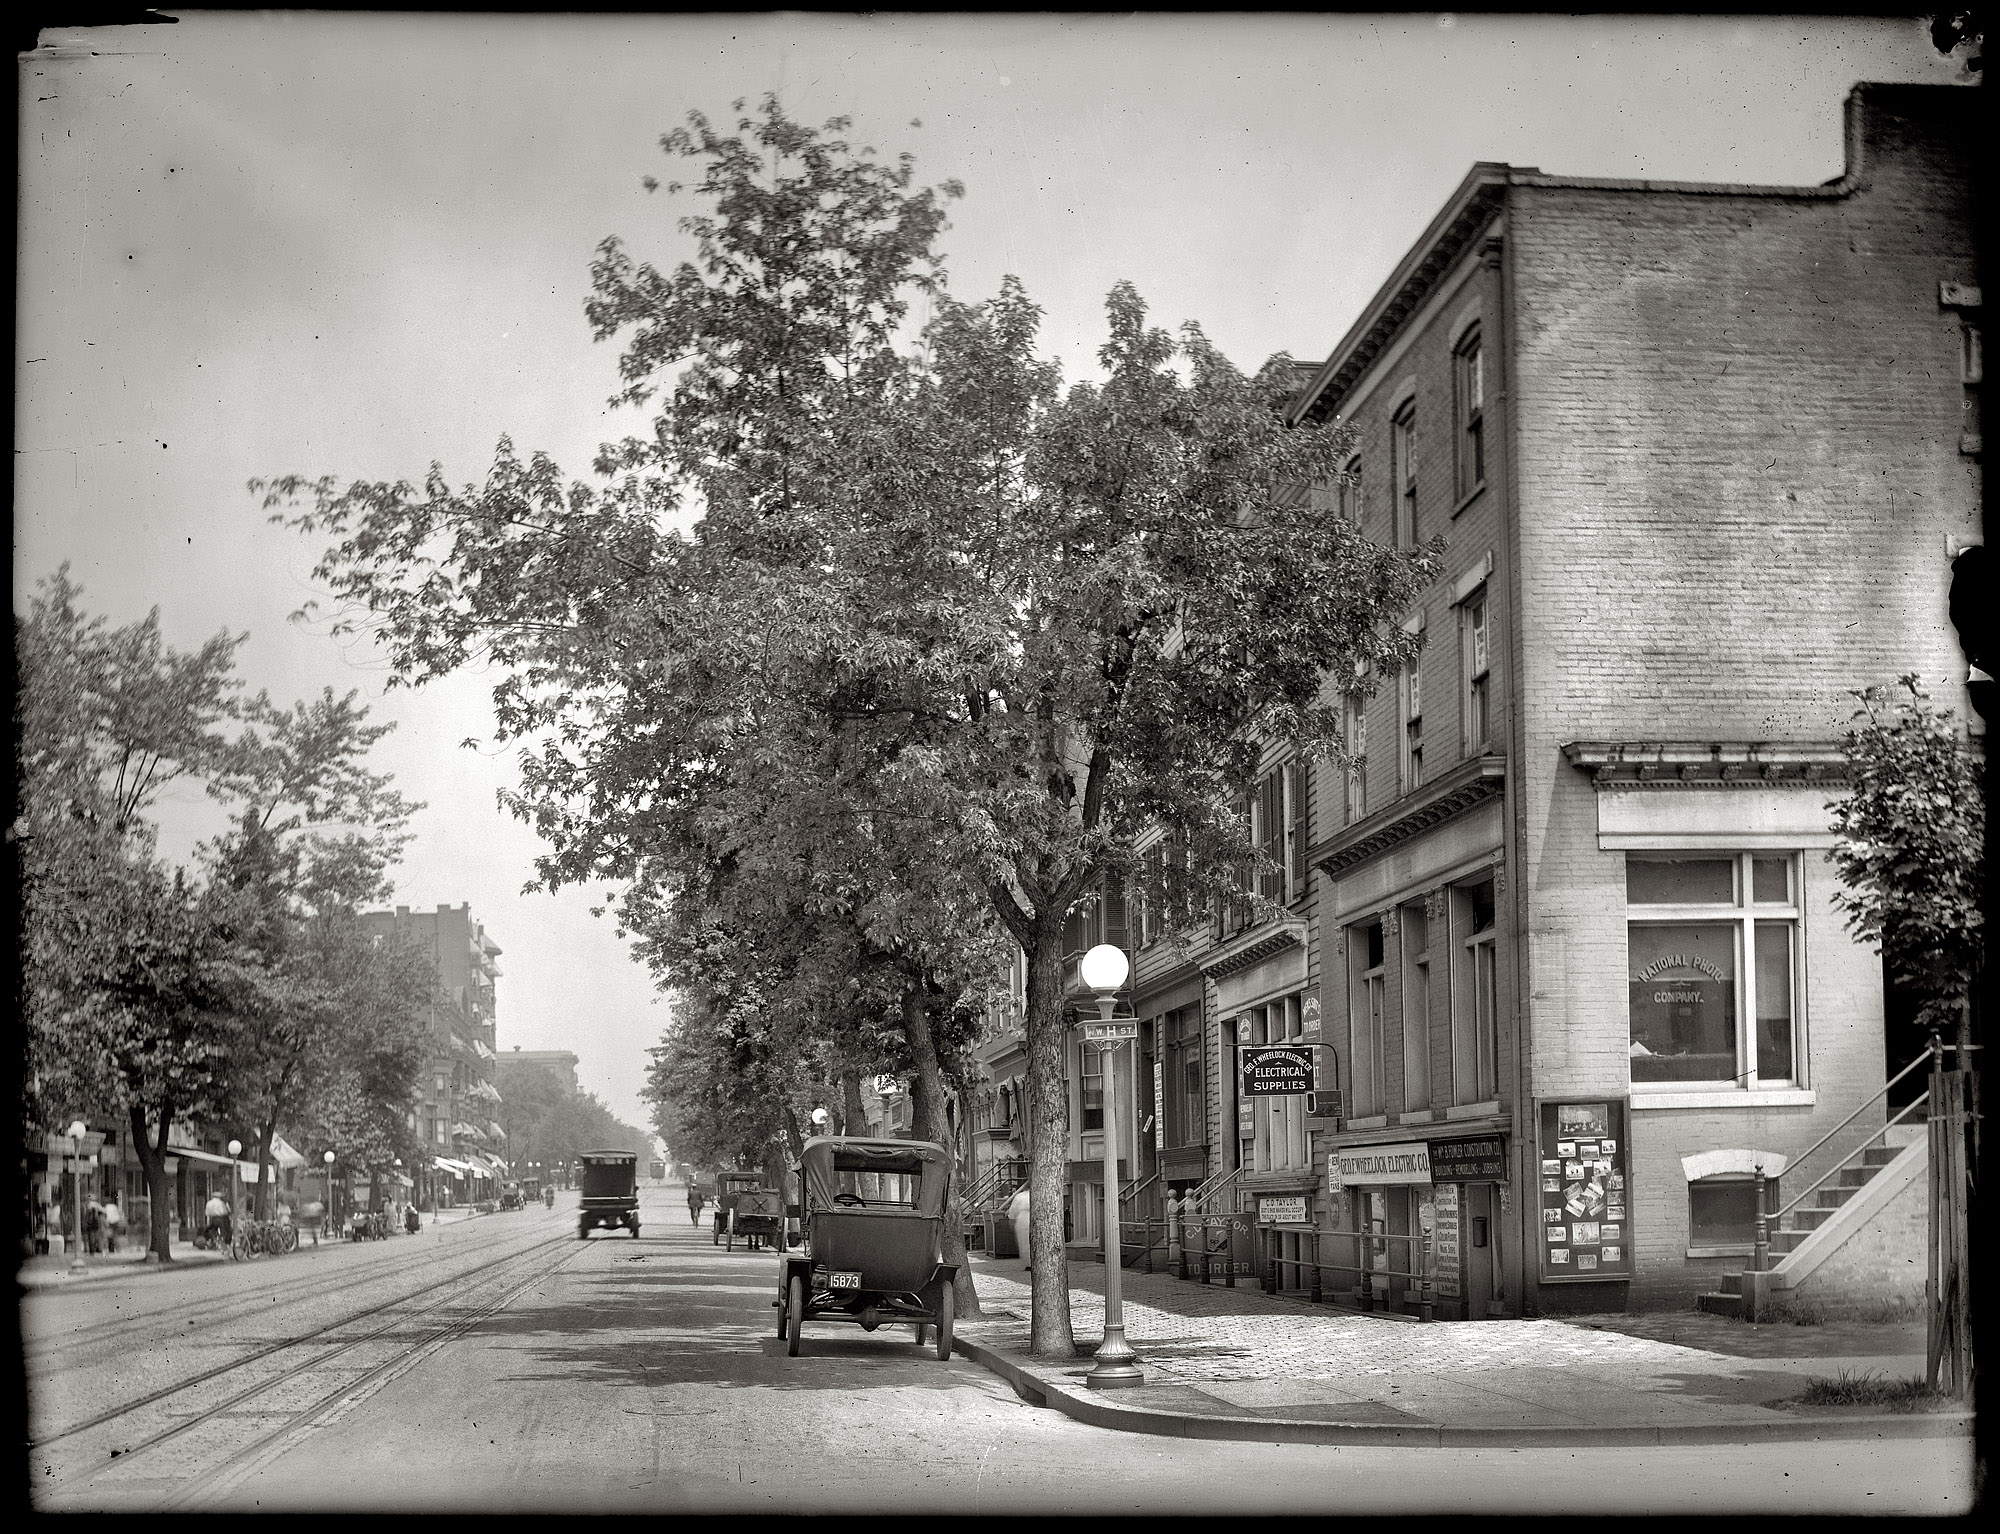 Washington, D.C., circa 1917. The National Photo Company office at 815 H Street N.W. View full size. National Photo Company Collection glass negative.